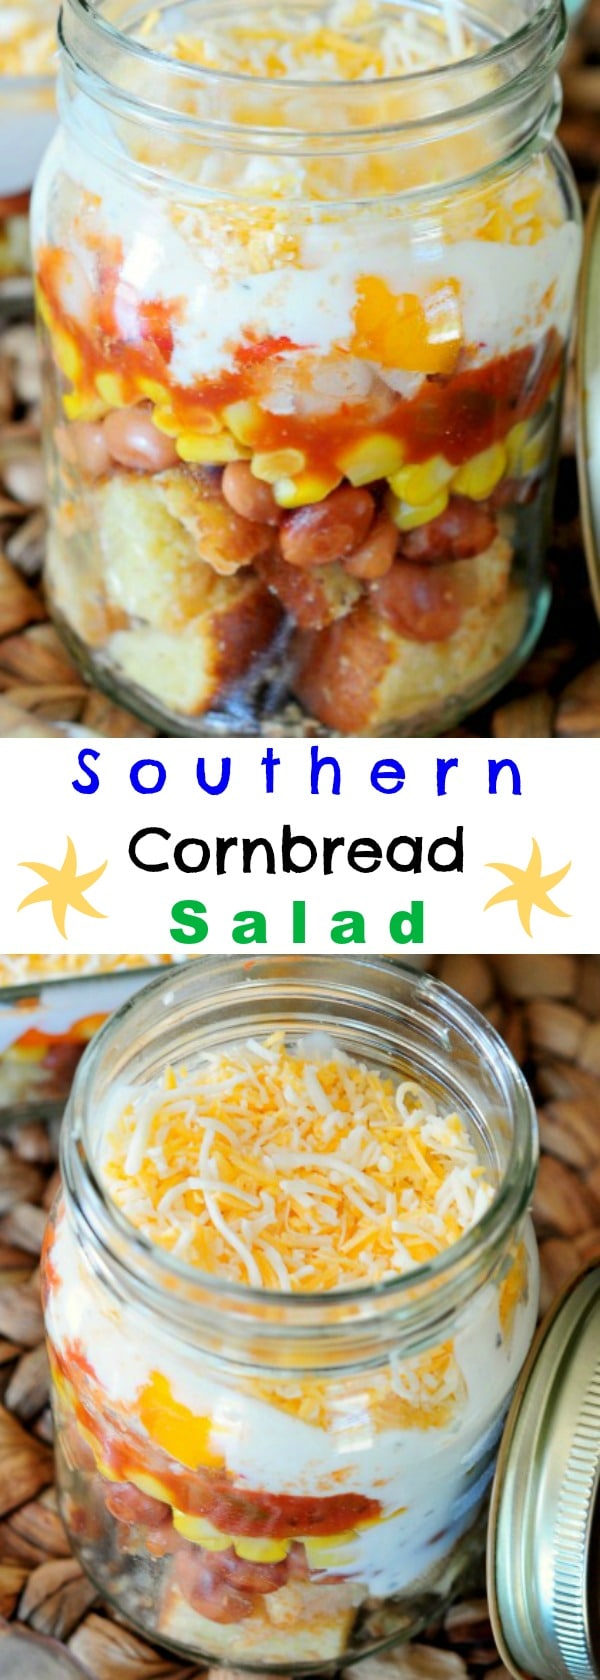 Southern Cornbread Salad - Back for Seconds